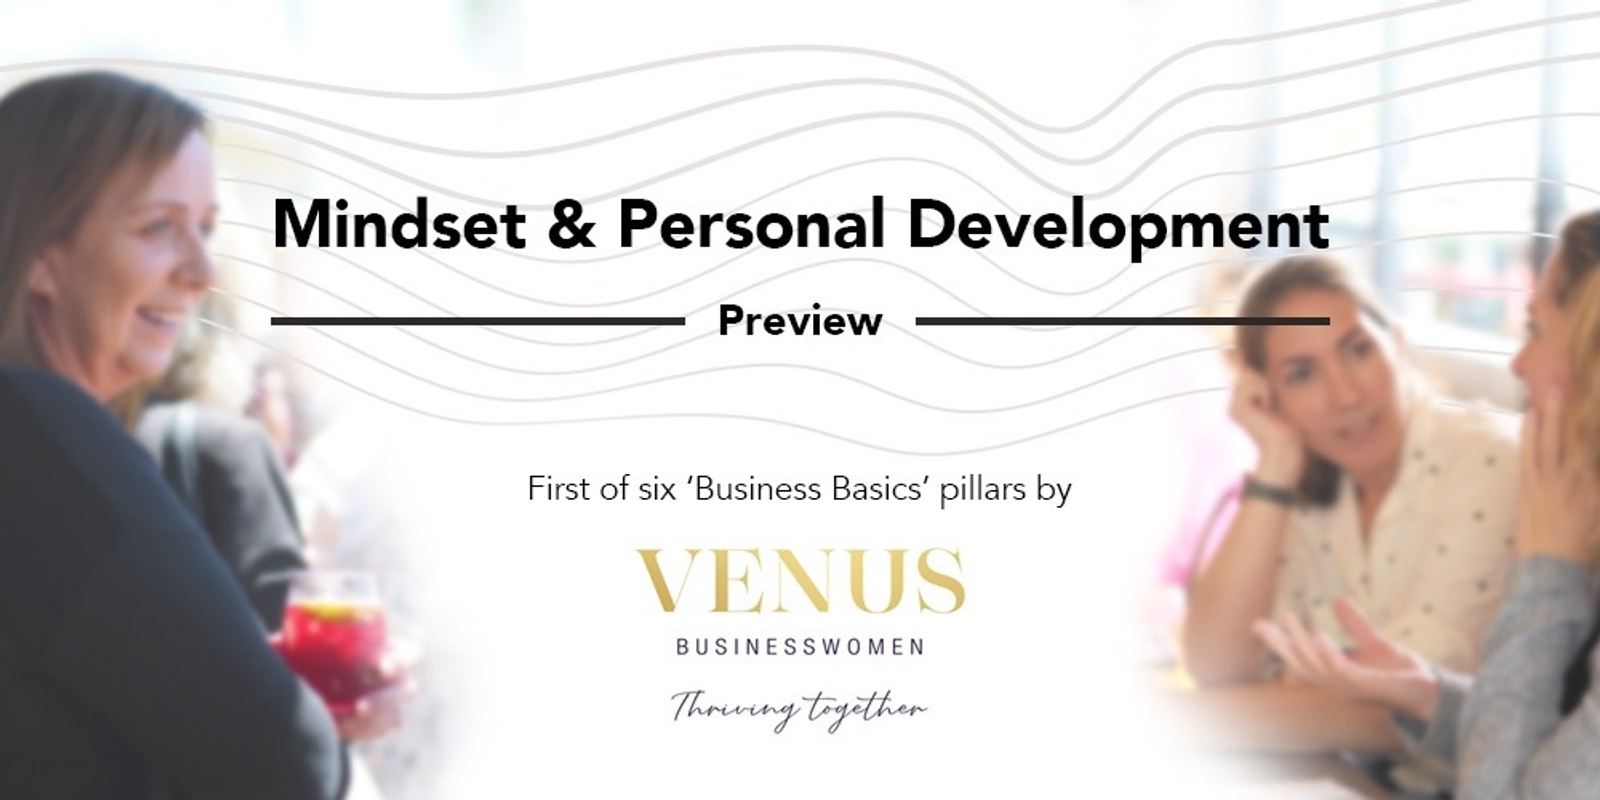 Banner image for Mindset & Personal Development Preview by Venus Businesswomen